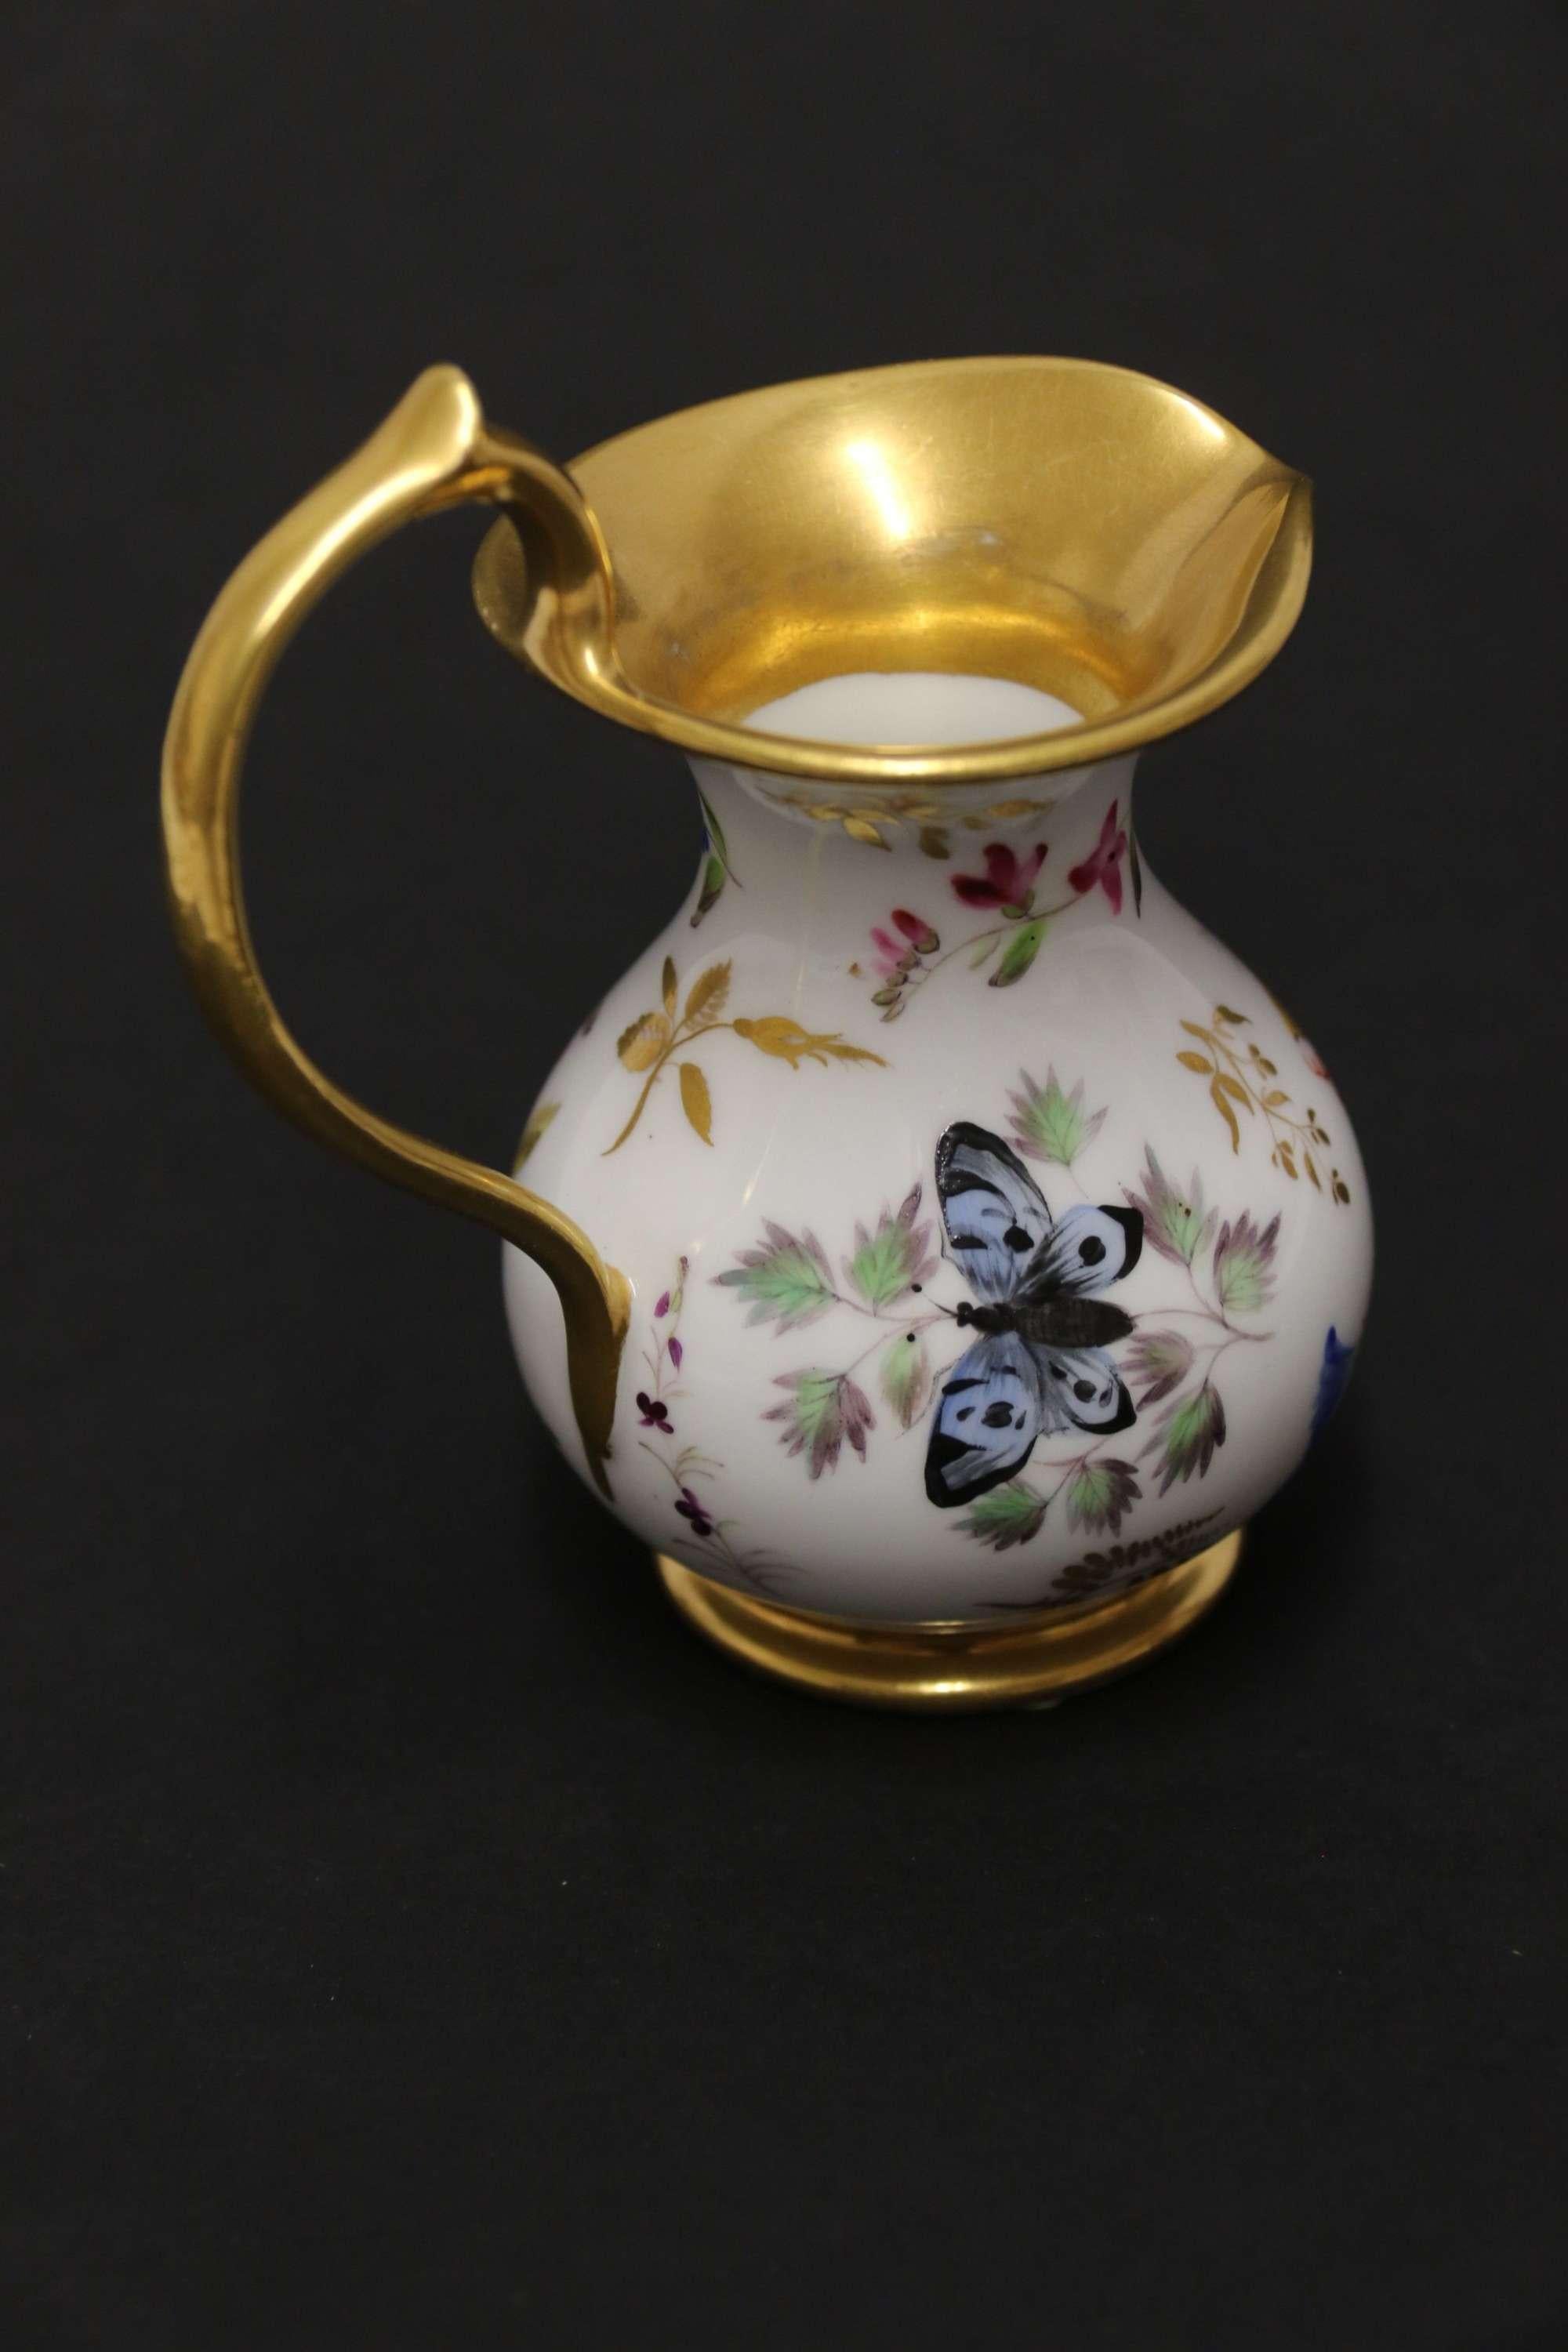 A Fine Quality Early 19th Century French Porcelain Miniature Ewer

A splendid small French porcelain ewer, circa 1830 exquisitely hand painted with an assortment of flowers, a shell, beetle, and butterfly. The rim, foot and fine handle are richly